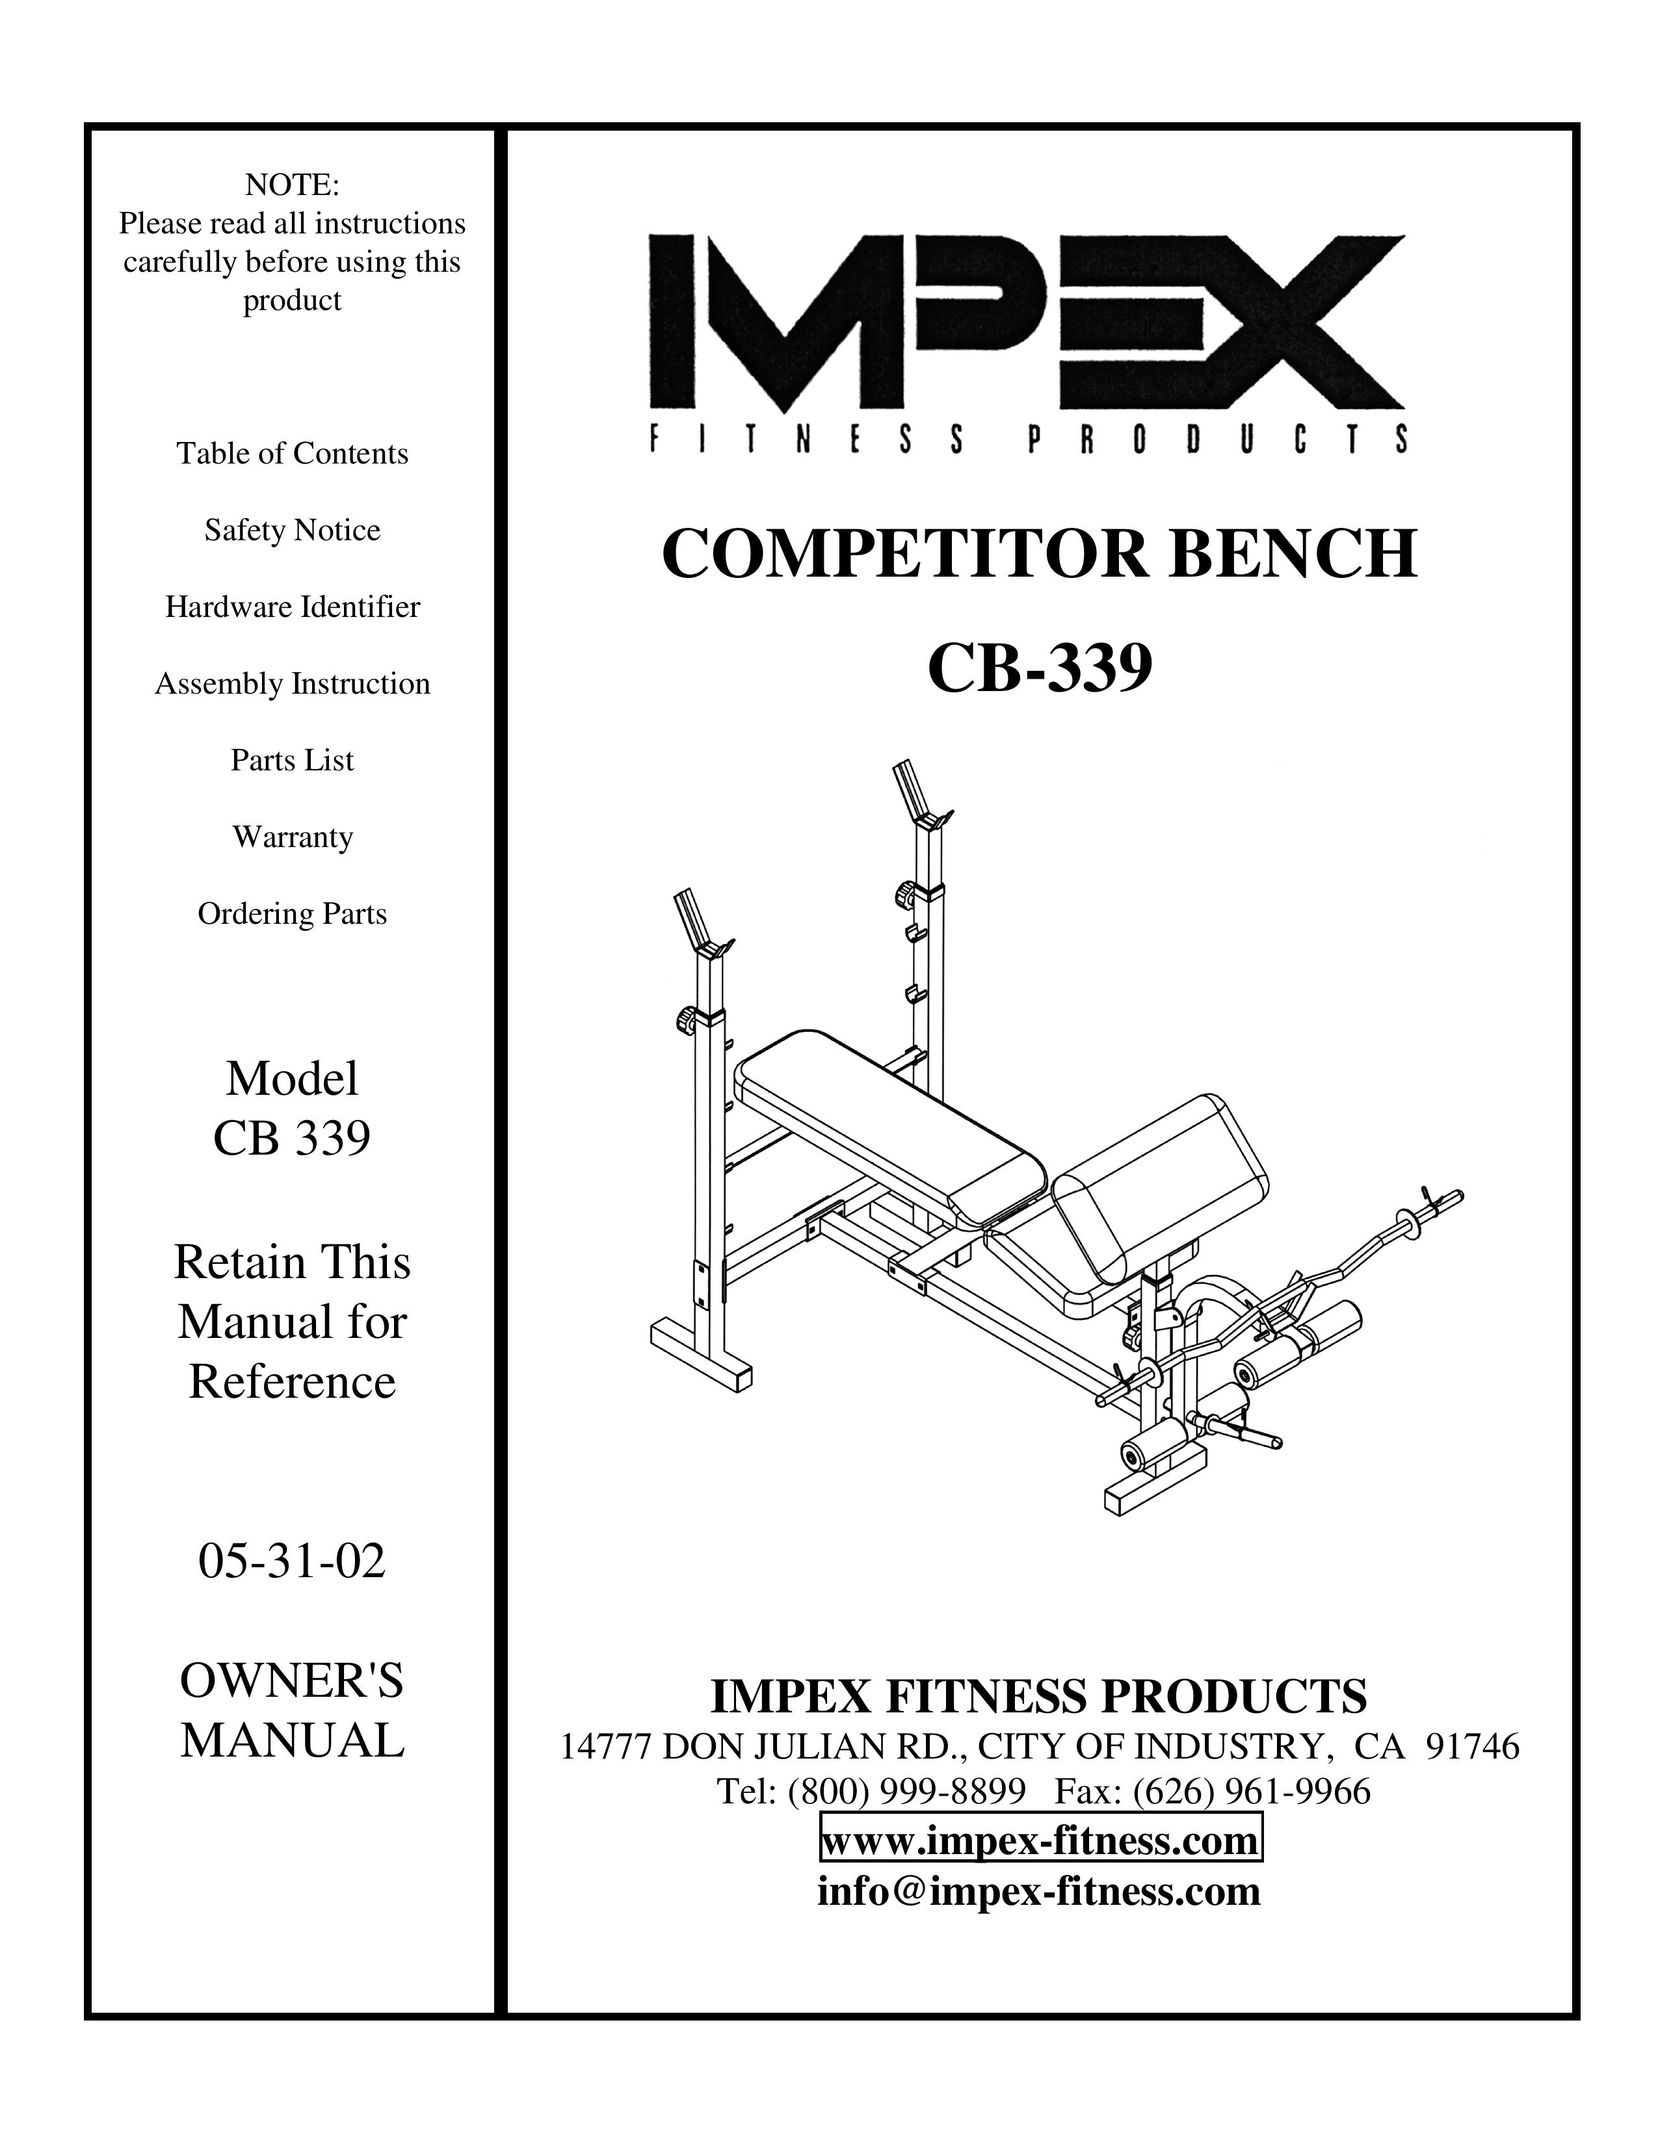 Impex CB-339 Home Gym User Manual